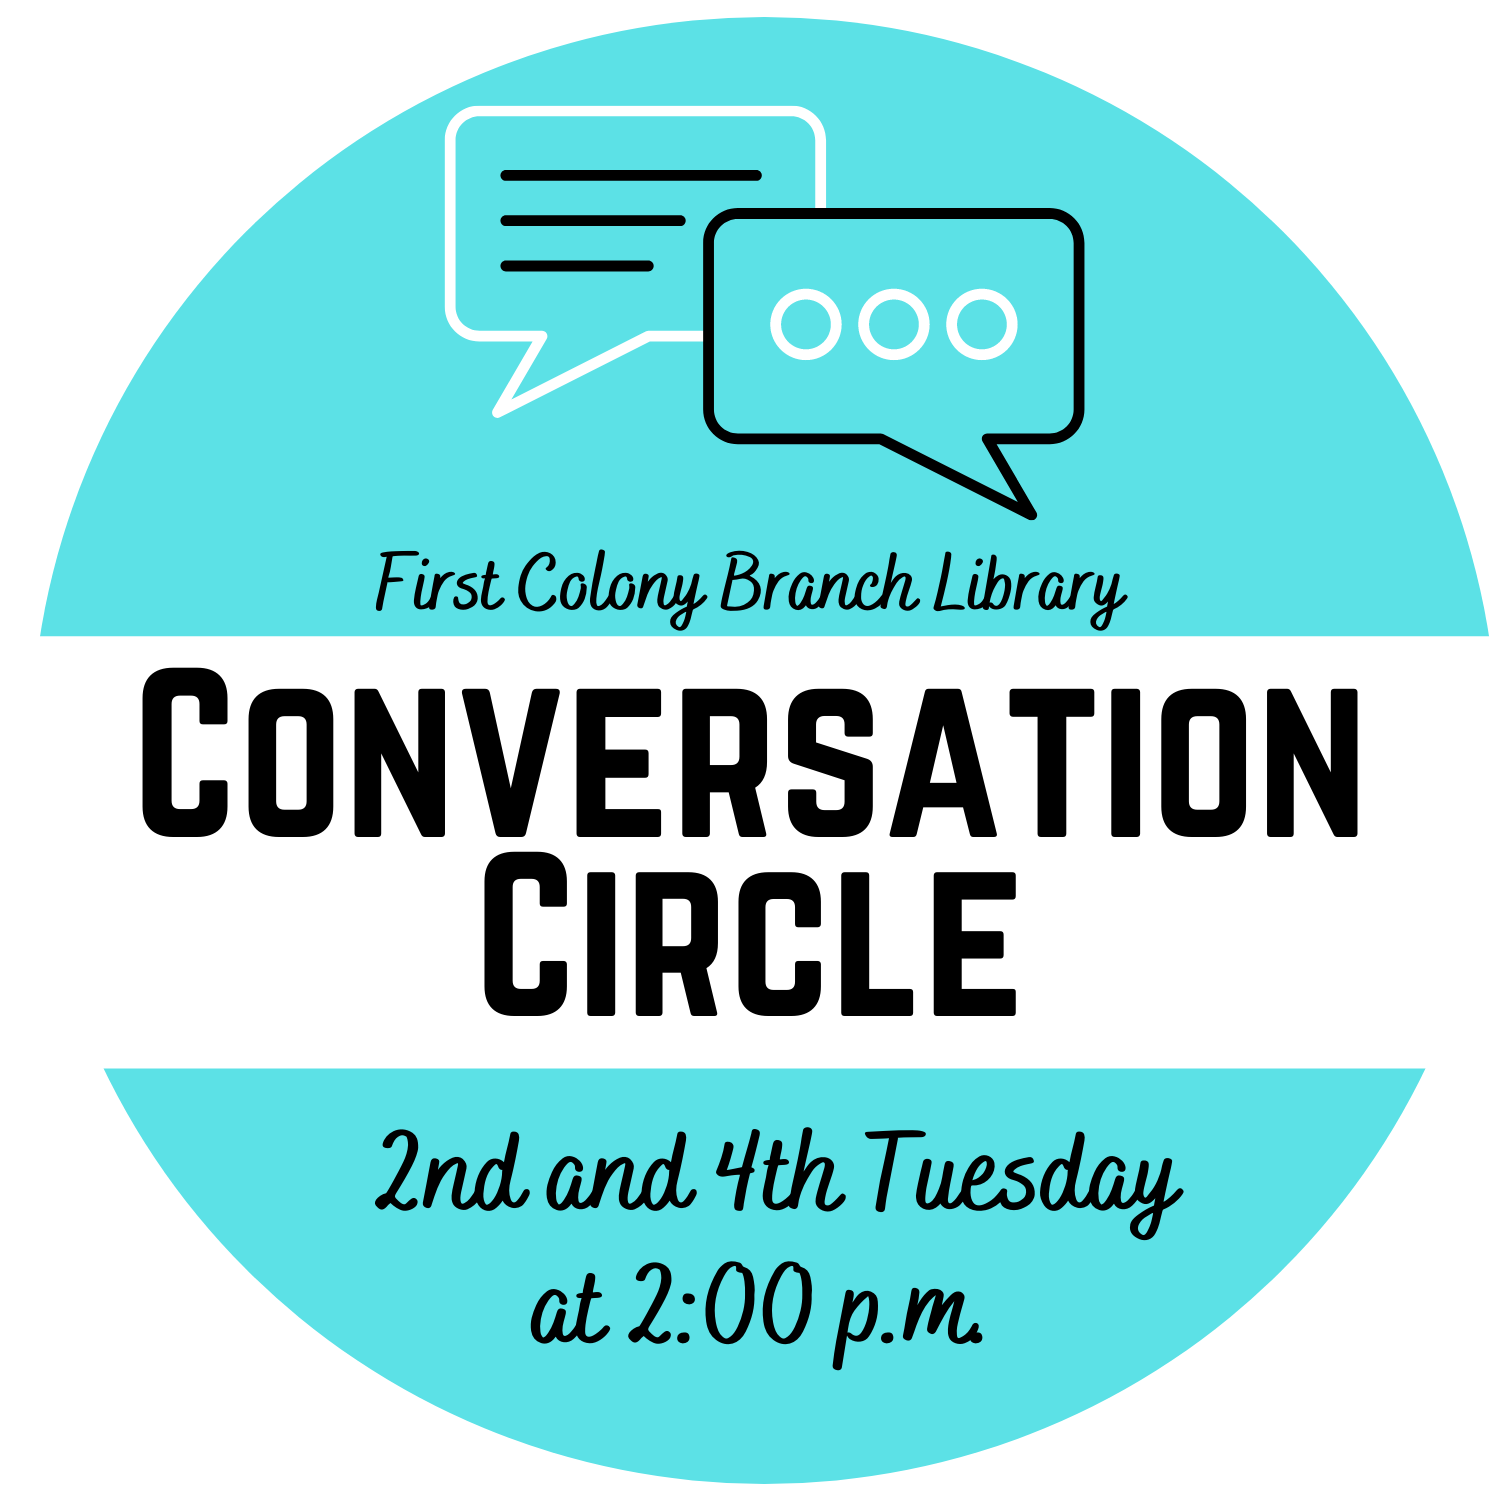 a teal circle with a white line. text reads "First Colony Branch Library Conversation Circle. 2nd and 4th Tuesday at 2:00pm."